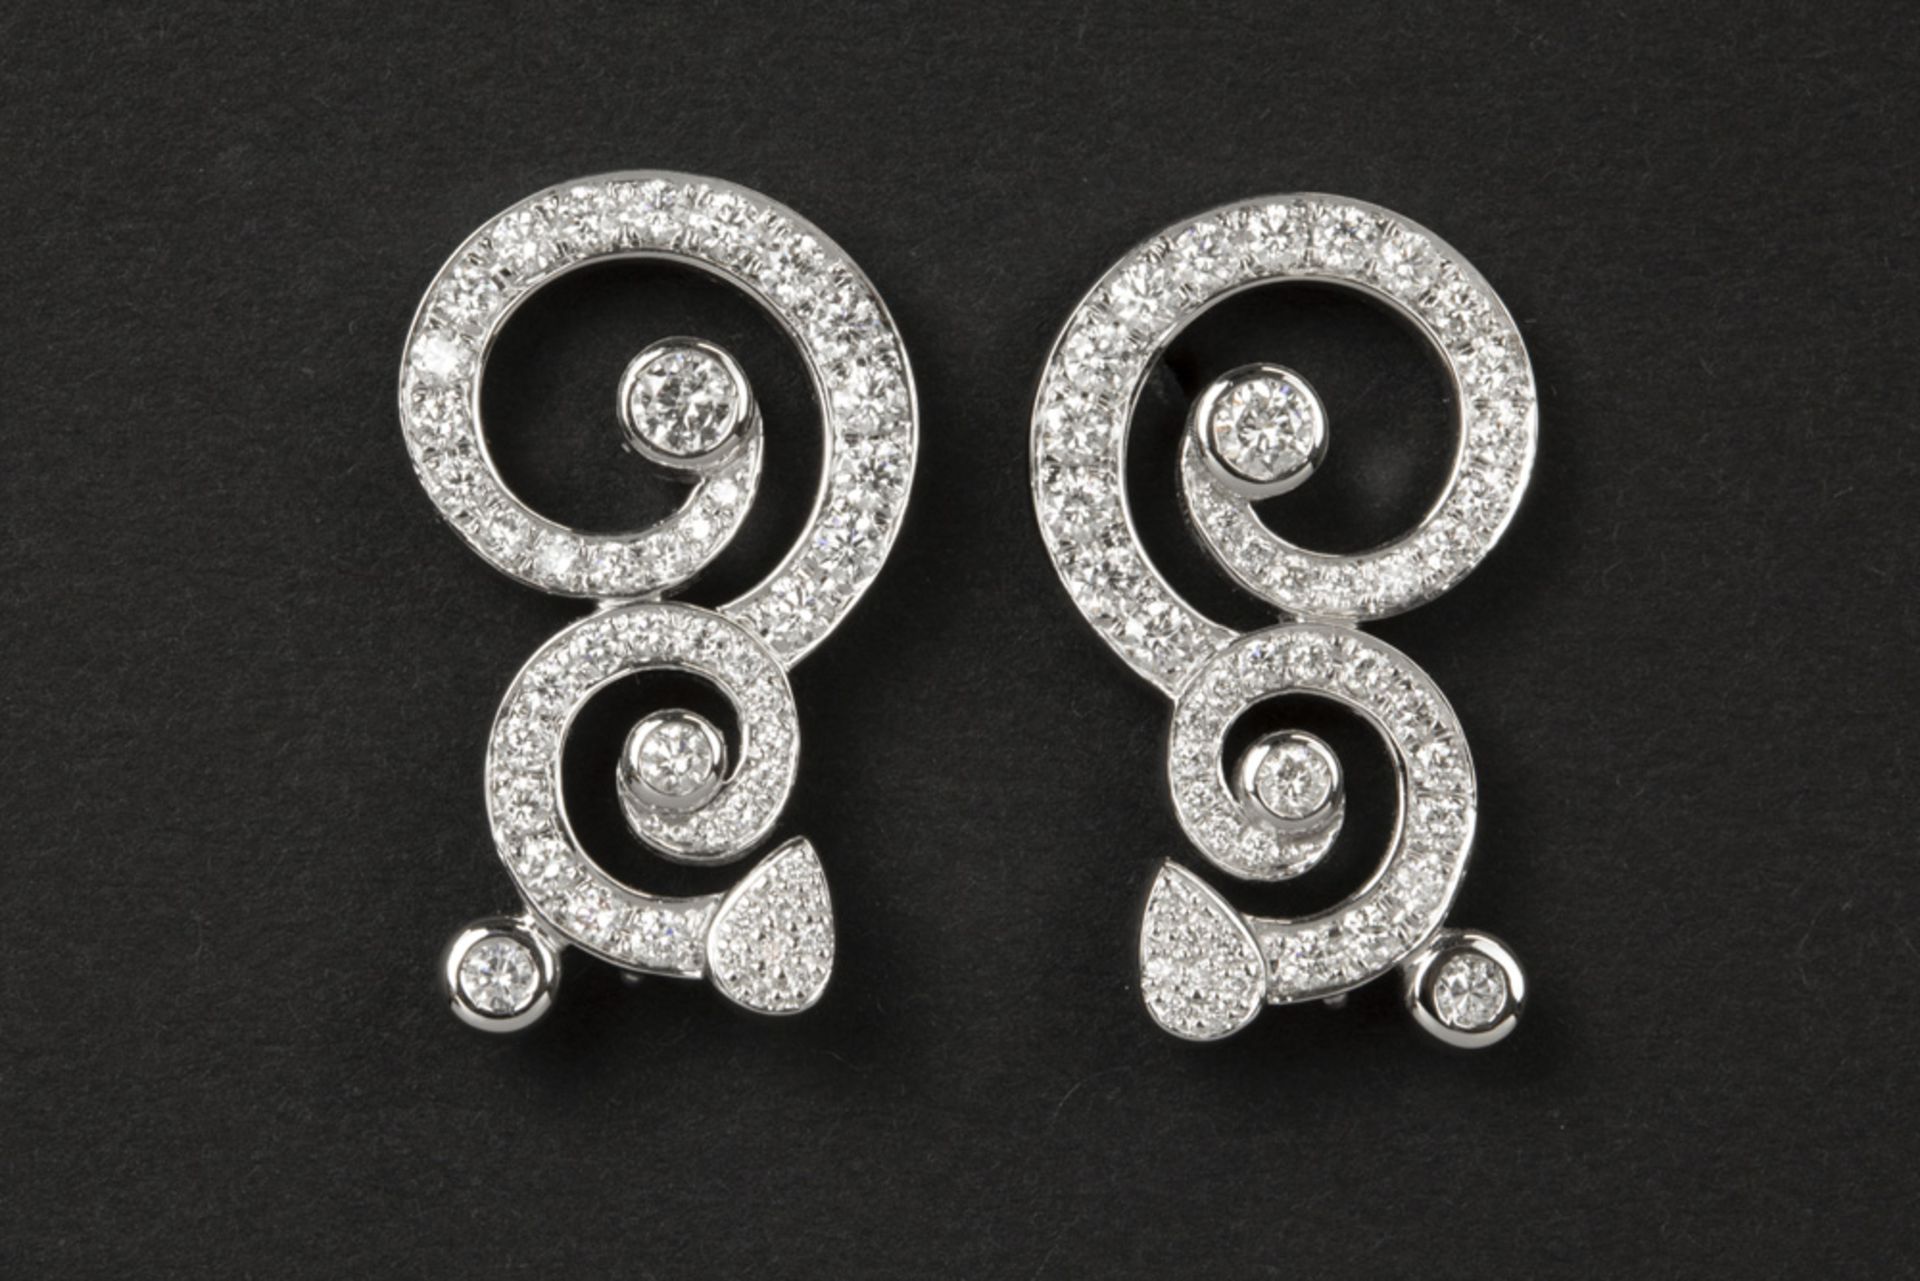 pair of earrings with an elegant arabesque design in white gold (18 carat) with ca 1,60 carat of